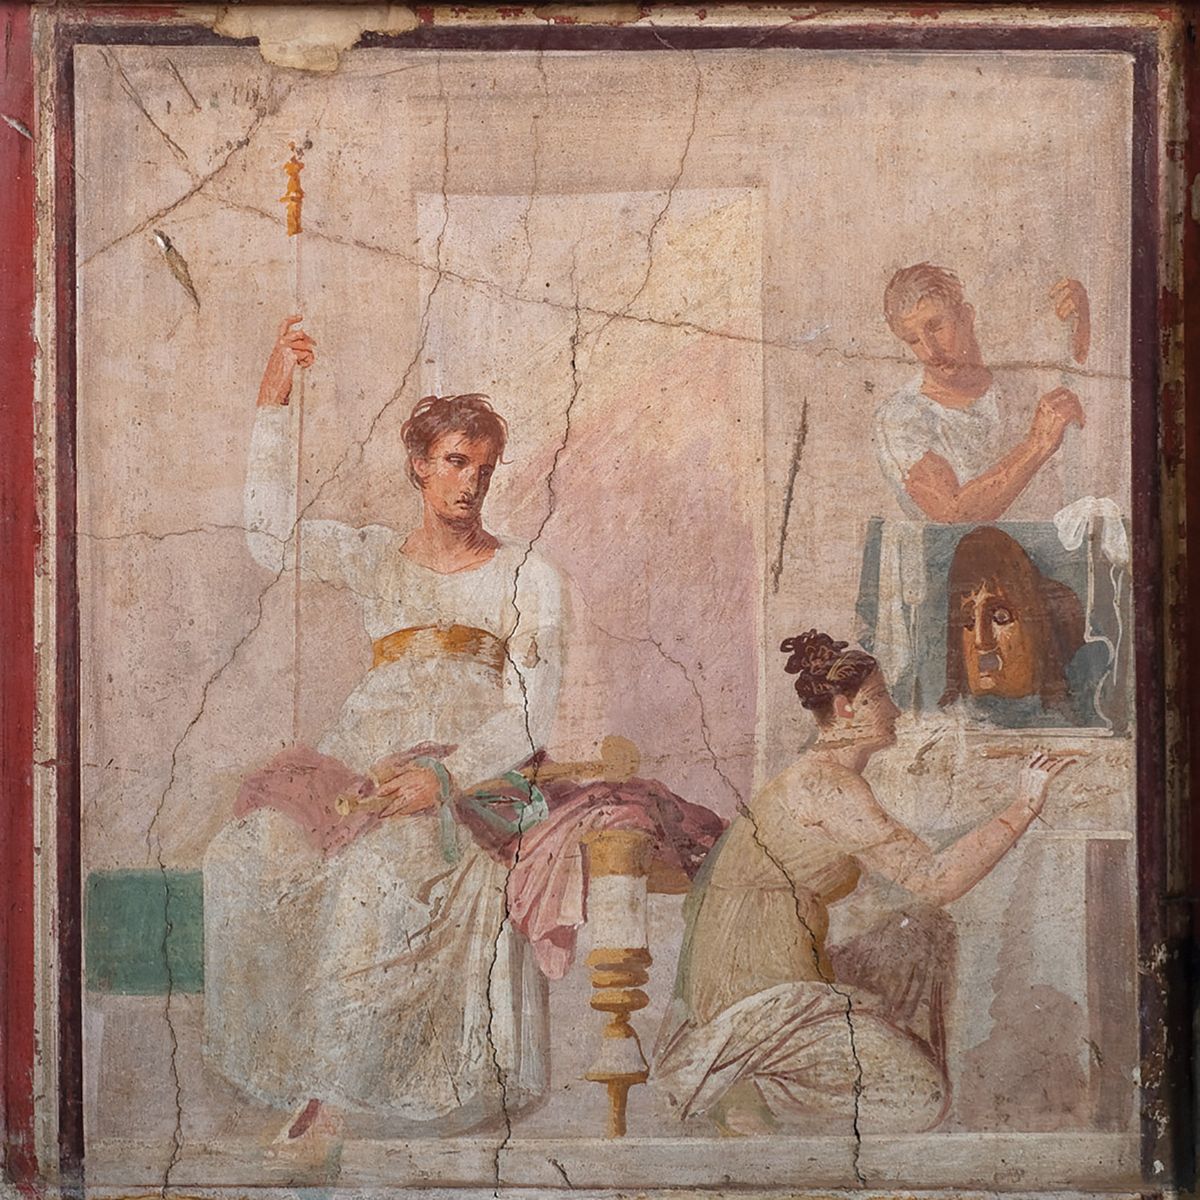 A fresco from Herculaneum (AD30-AD40) of an actor dressed as king, and female figure with a small painting of a mask Museo Archeologico Nazionale di Napoli